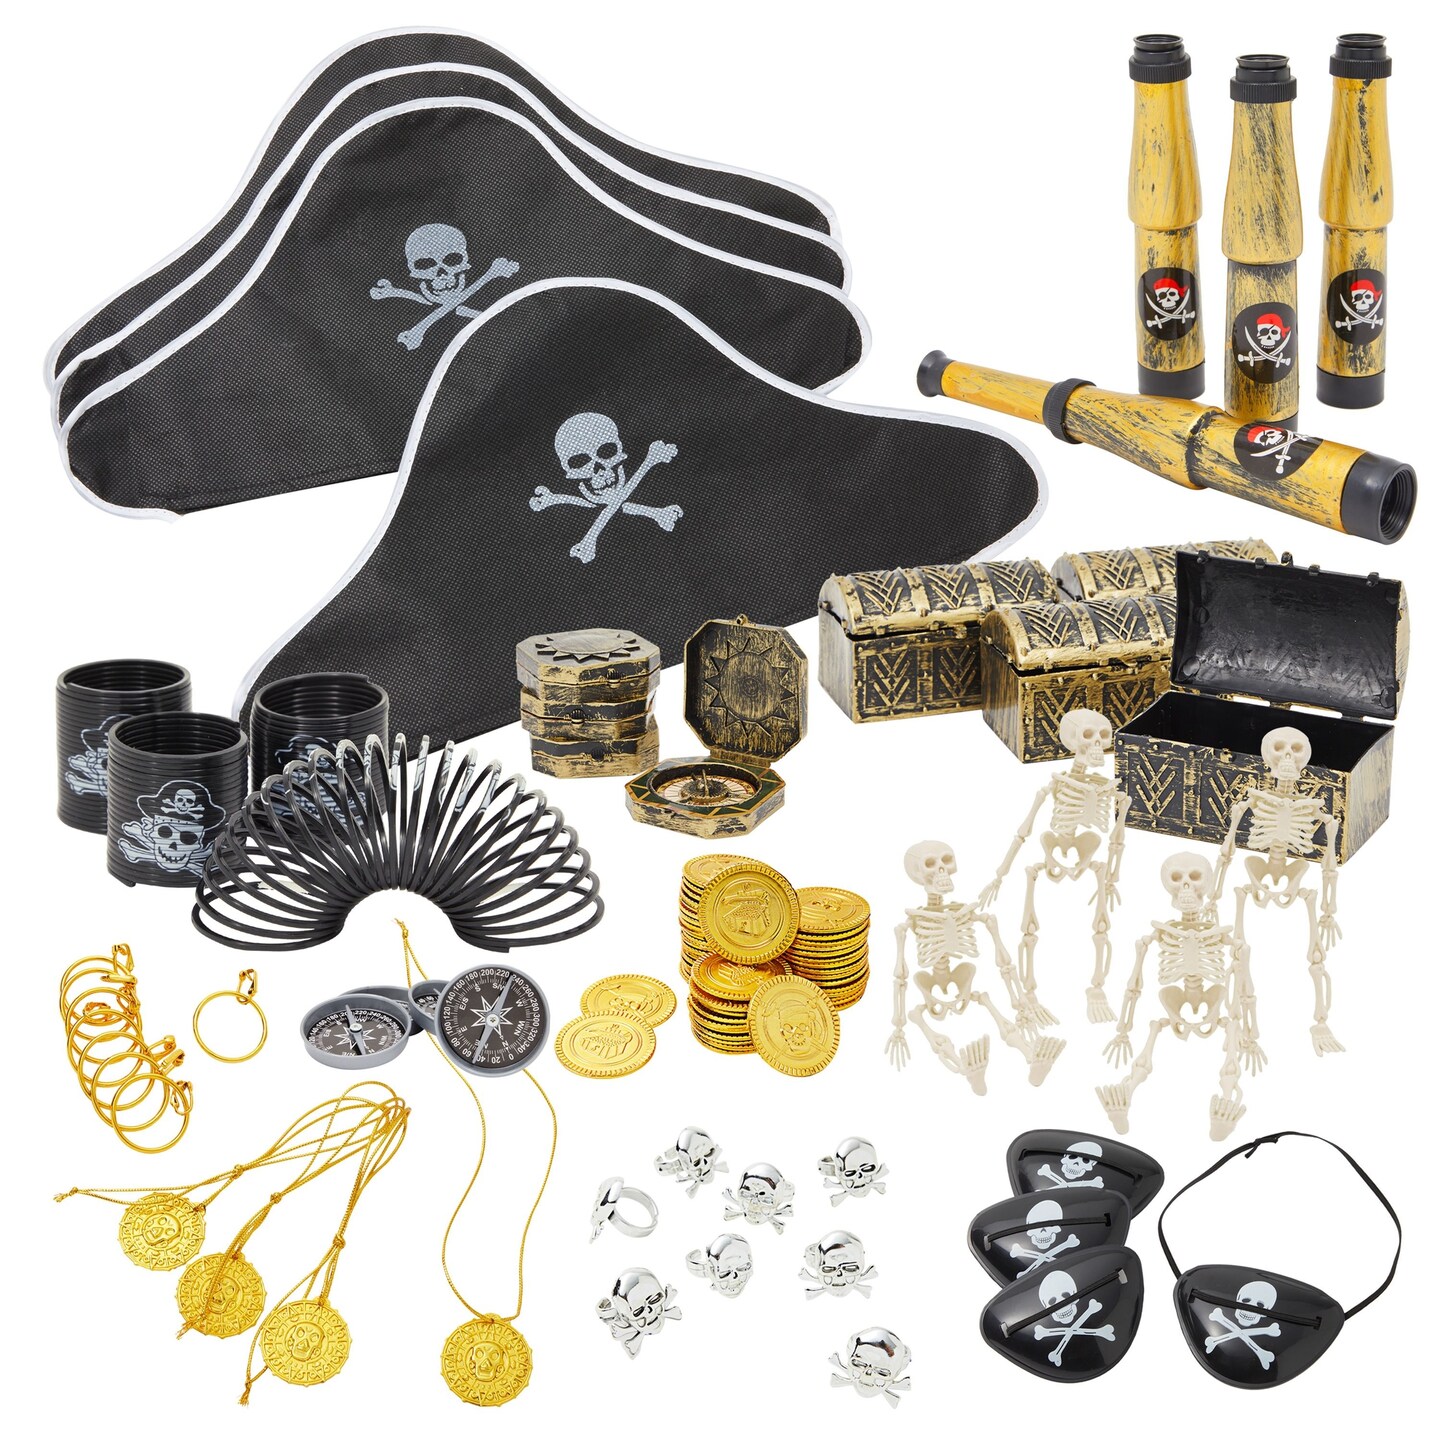 100 Piece Set Pirate Birthday Party Supplies for Kids, Hat, Patch